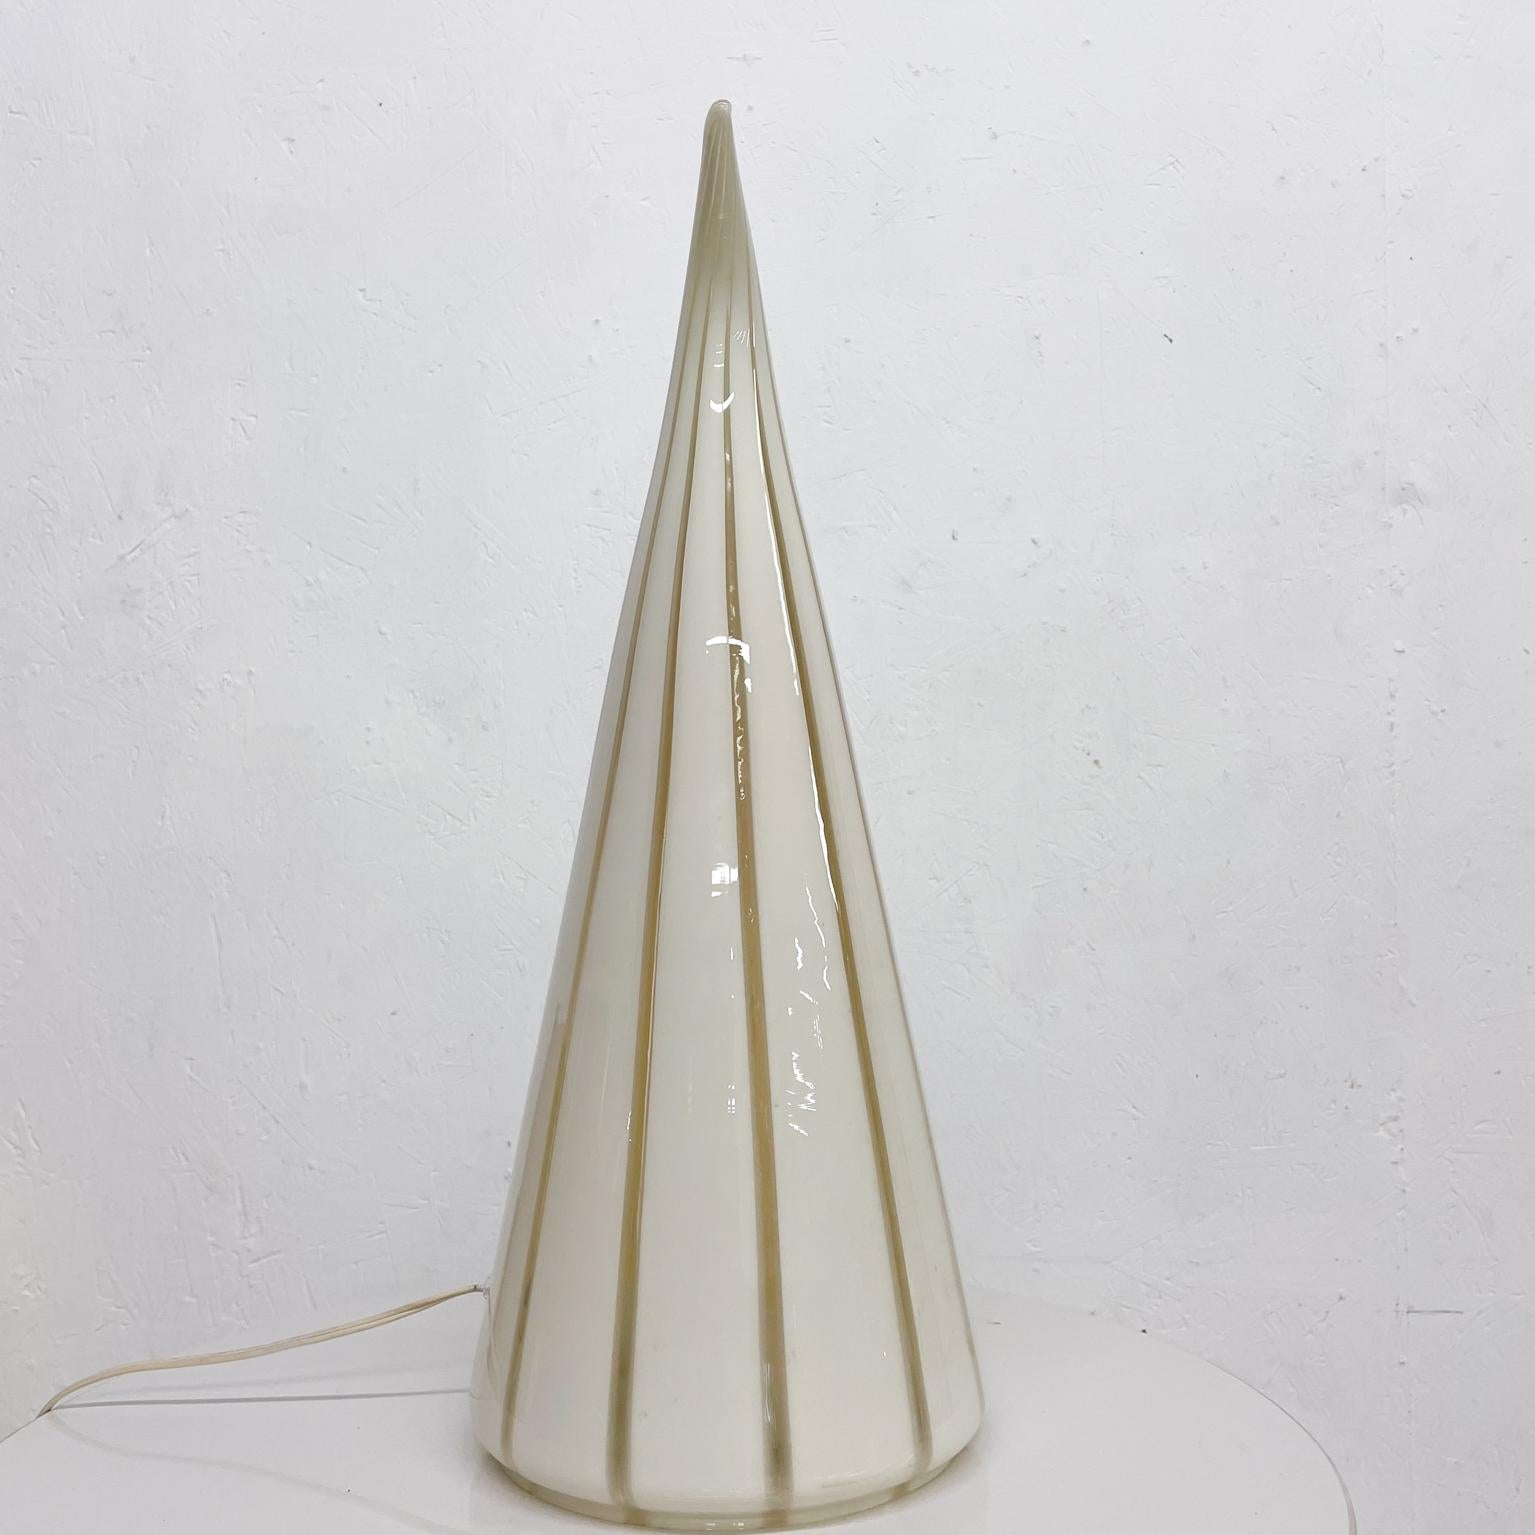 Sculptural finesse blown glass horn table lamp by Seguso Vetri d'Arte Italy, 1960s
Lamp in a horn design milky white with lovely soft swirl. Provides warm glow, the perfect mood light!
No label present.
Has been tested for you working and in good